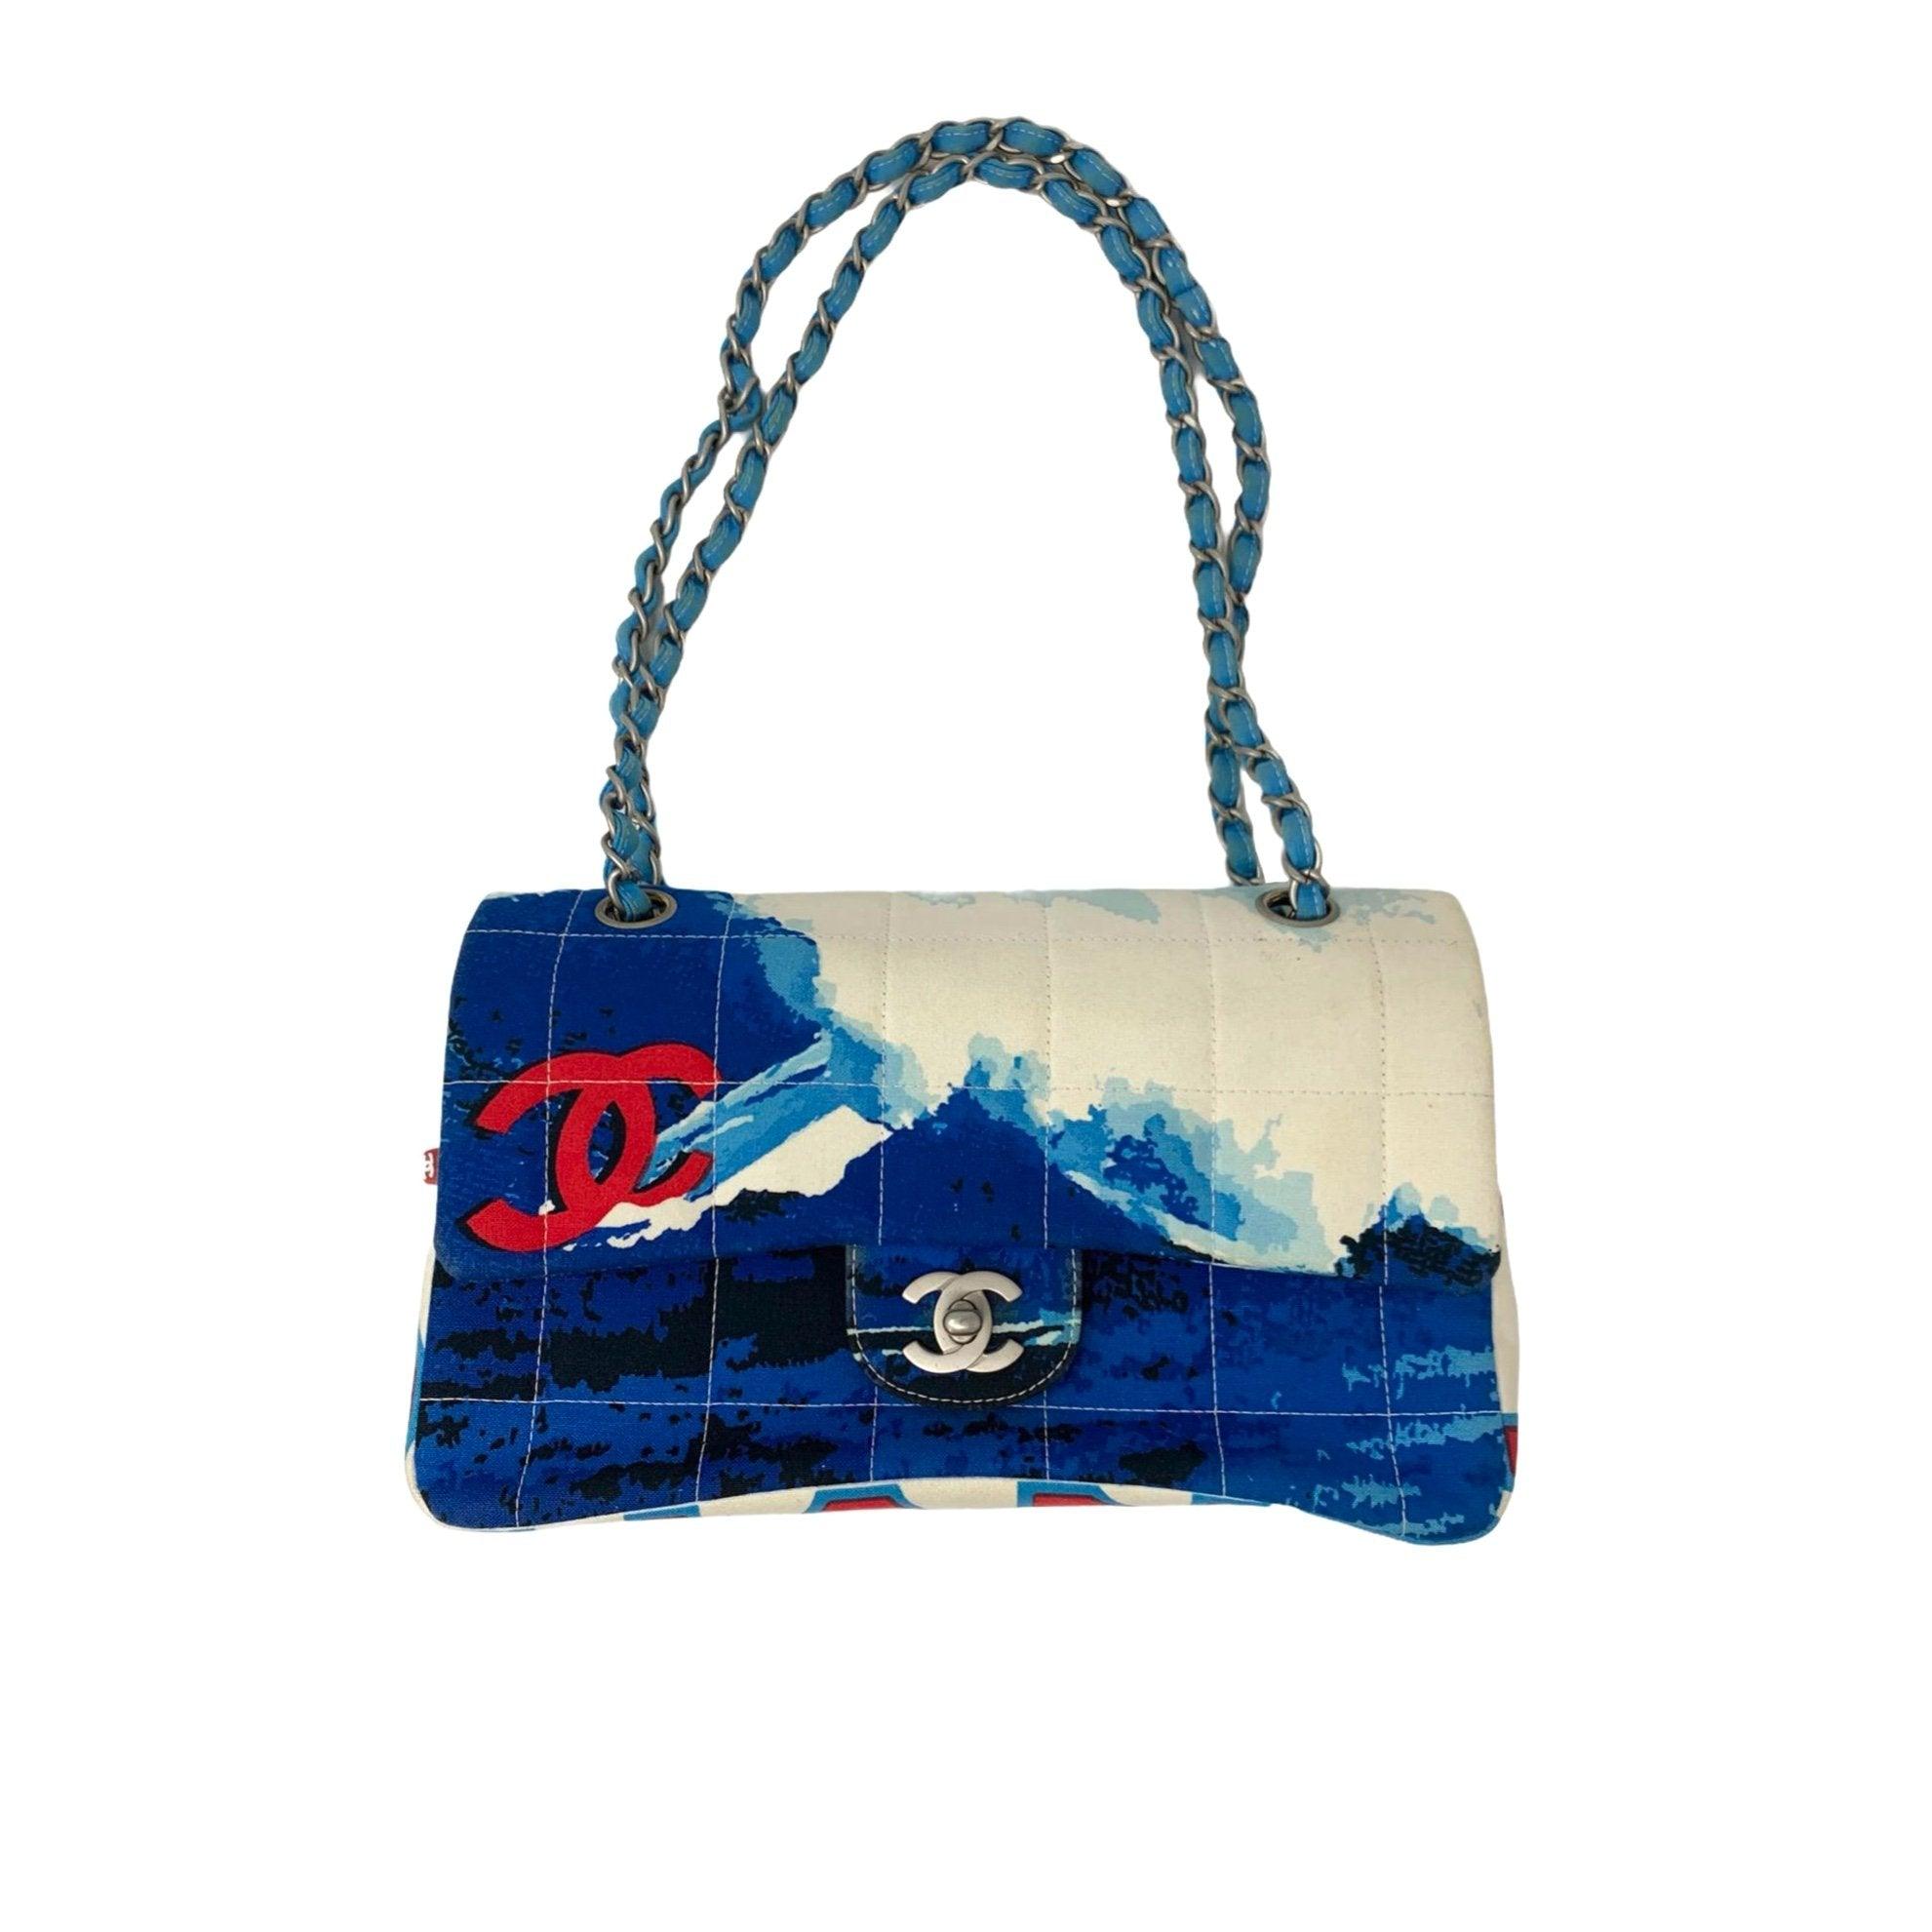 chanel surf tote